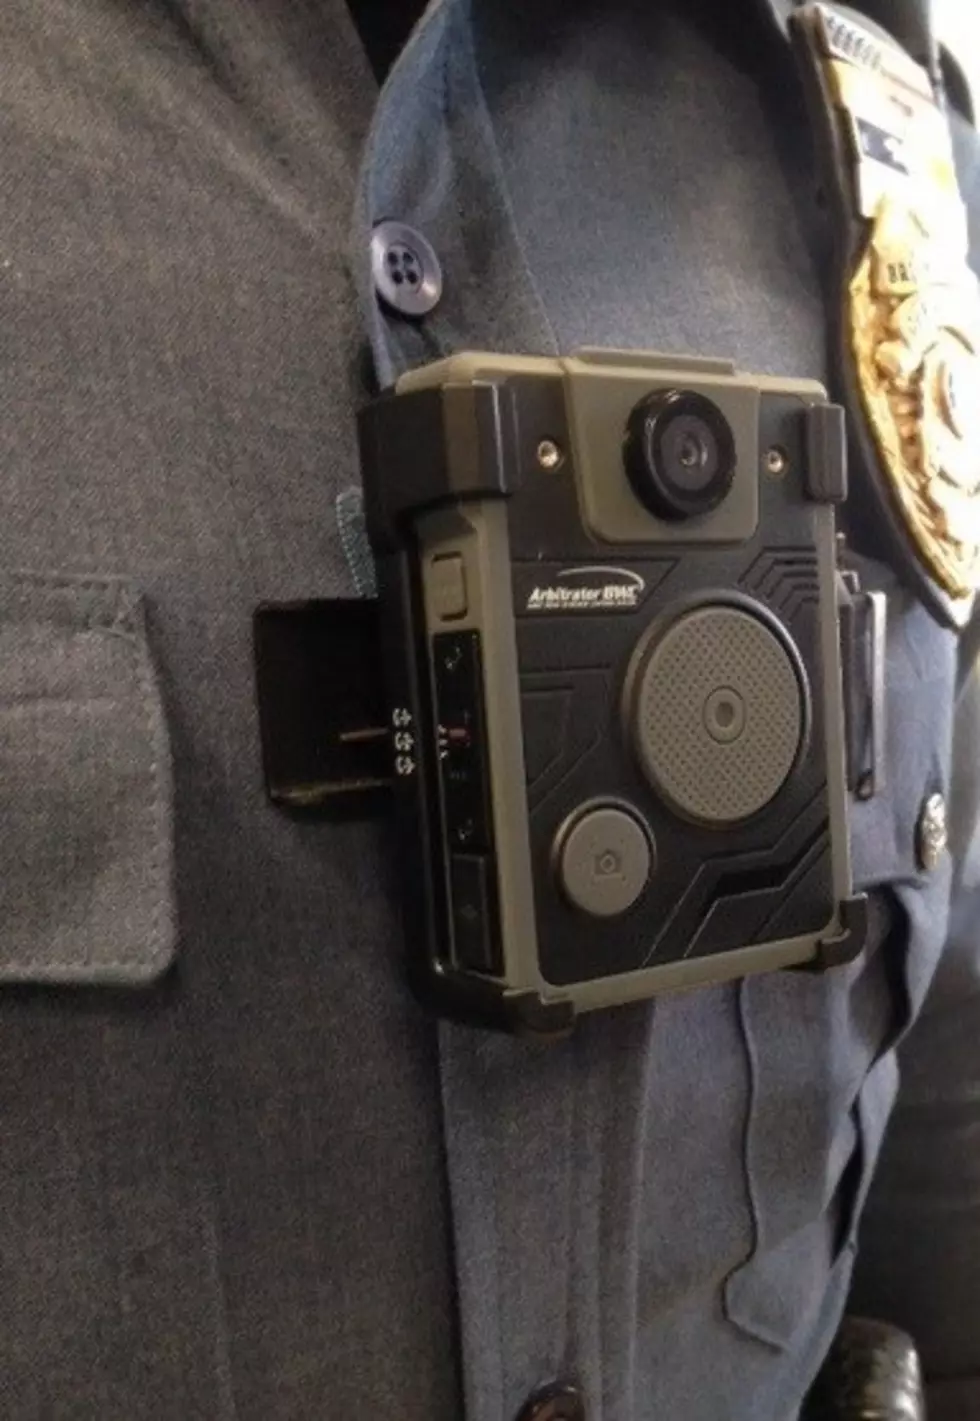 Brick Police to begin using body-warn cameras for patrol officers